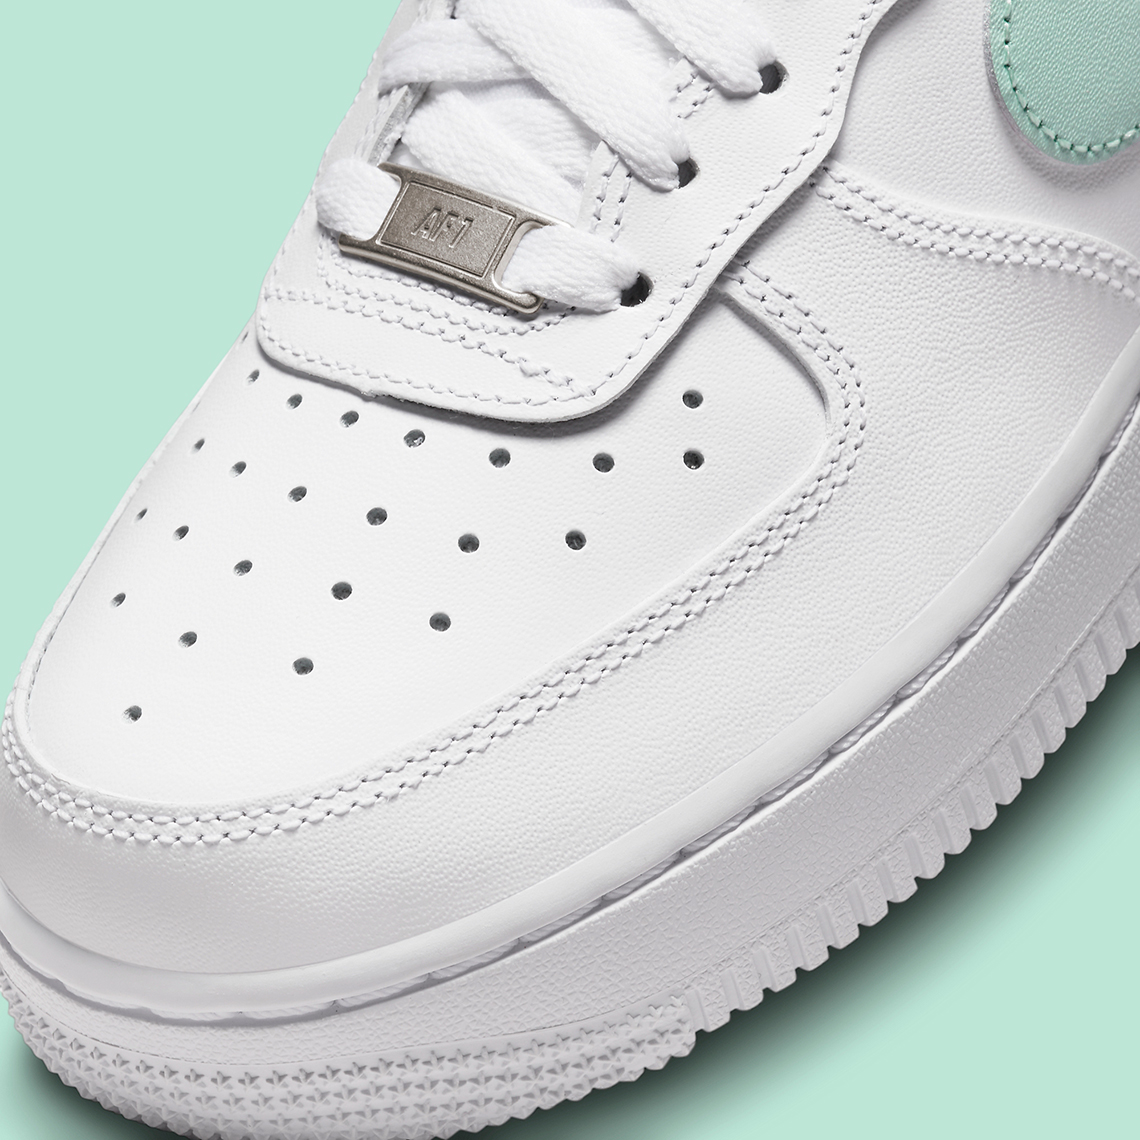 Nike Air Force 1 Low Flyease White Jade Ice Dx5883 101 1